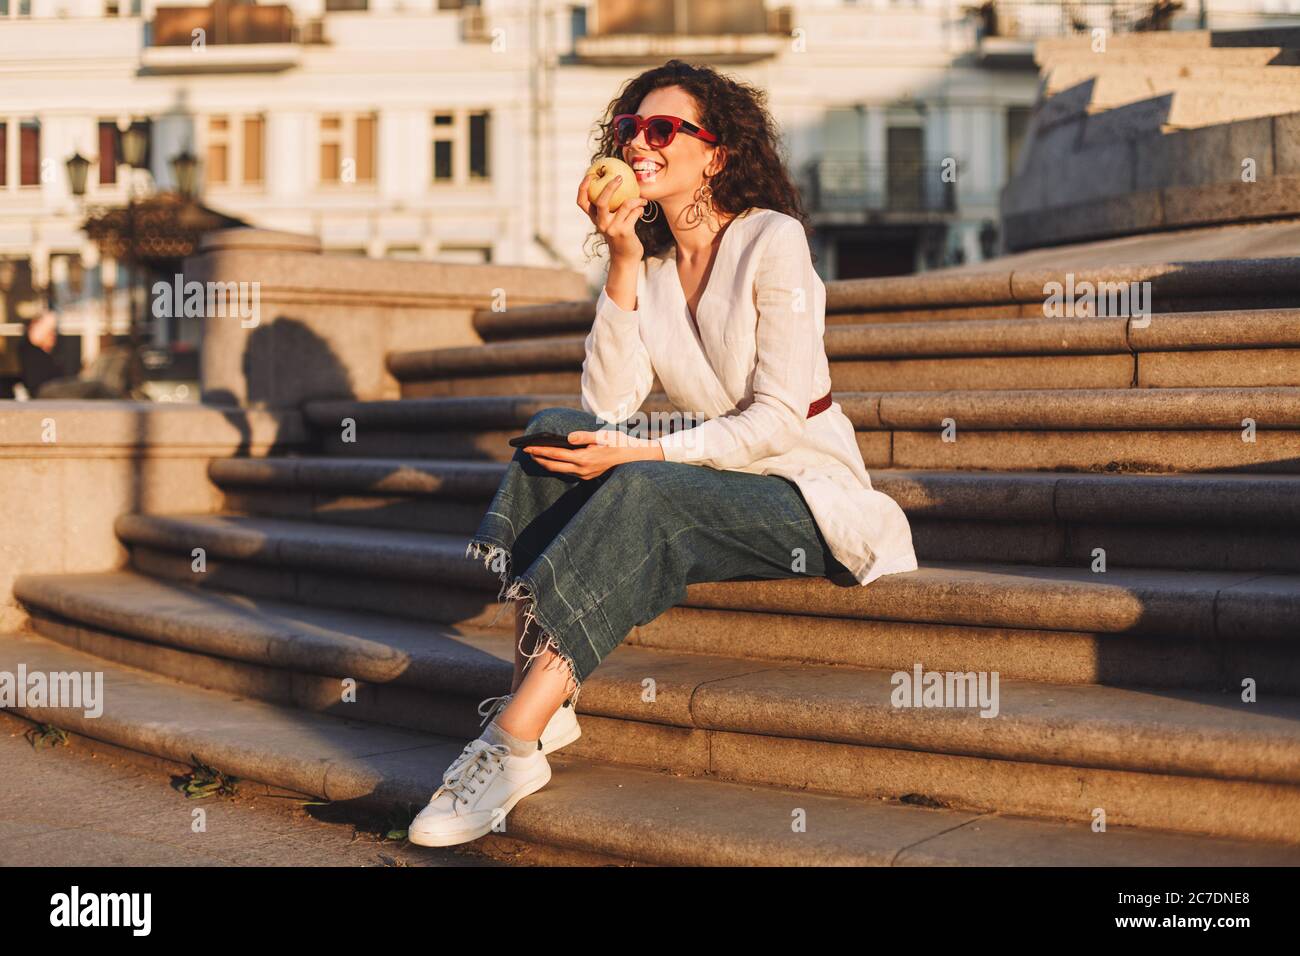 Beautiful smiling lady with dark curly hair in sunglasses and white jacket sitting on stairs with cellphone and apple in hands on street Stock Photo